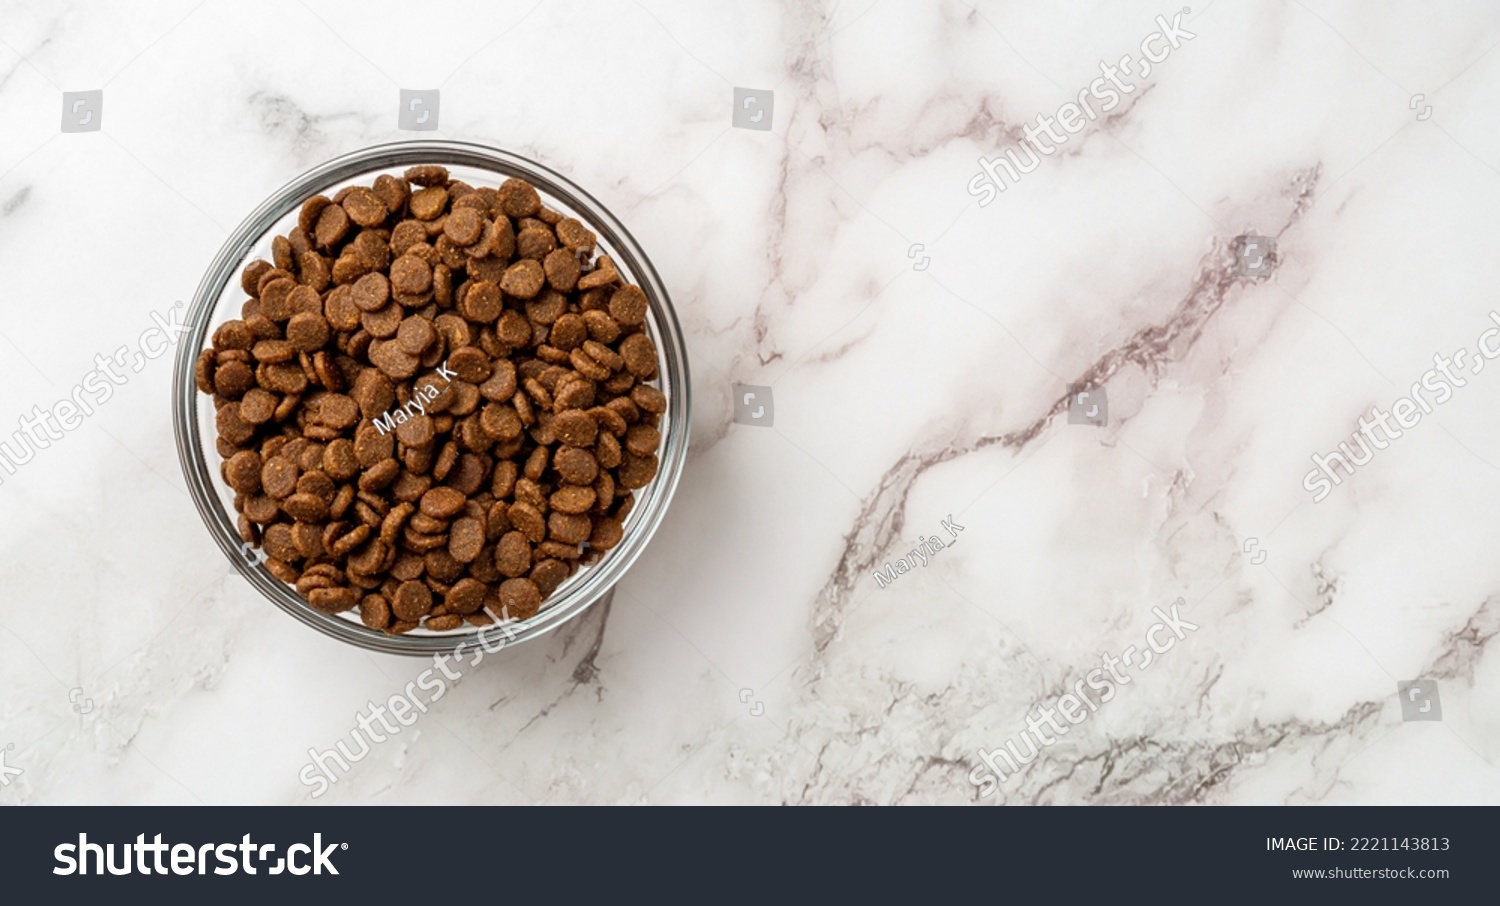 Dry pet food in a glass bowl over marble background. Glass feeding bowl full of gluten free dry protein kibbles for cats closeup. Complete food for domestic animals concept. Copy space. Top view. #2221143813